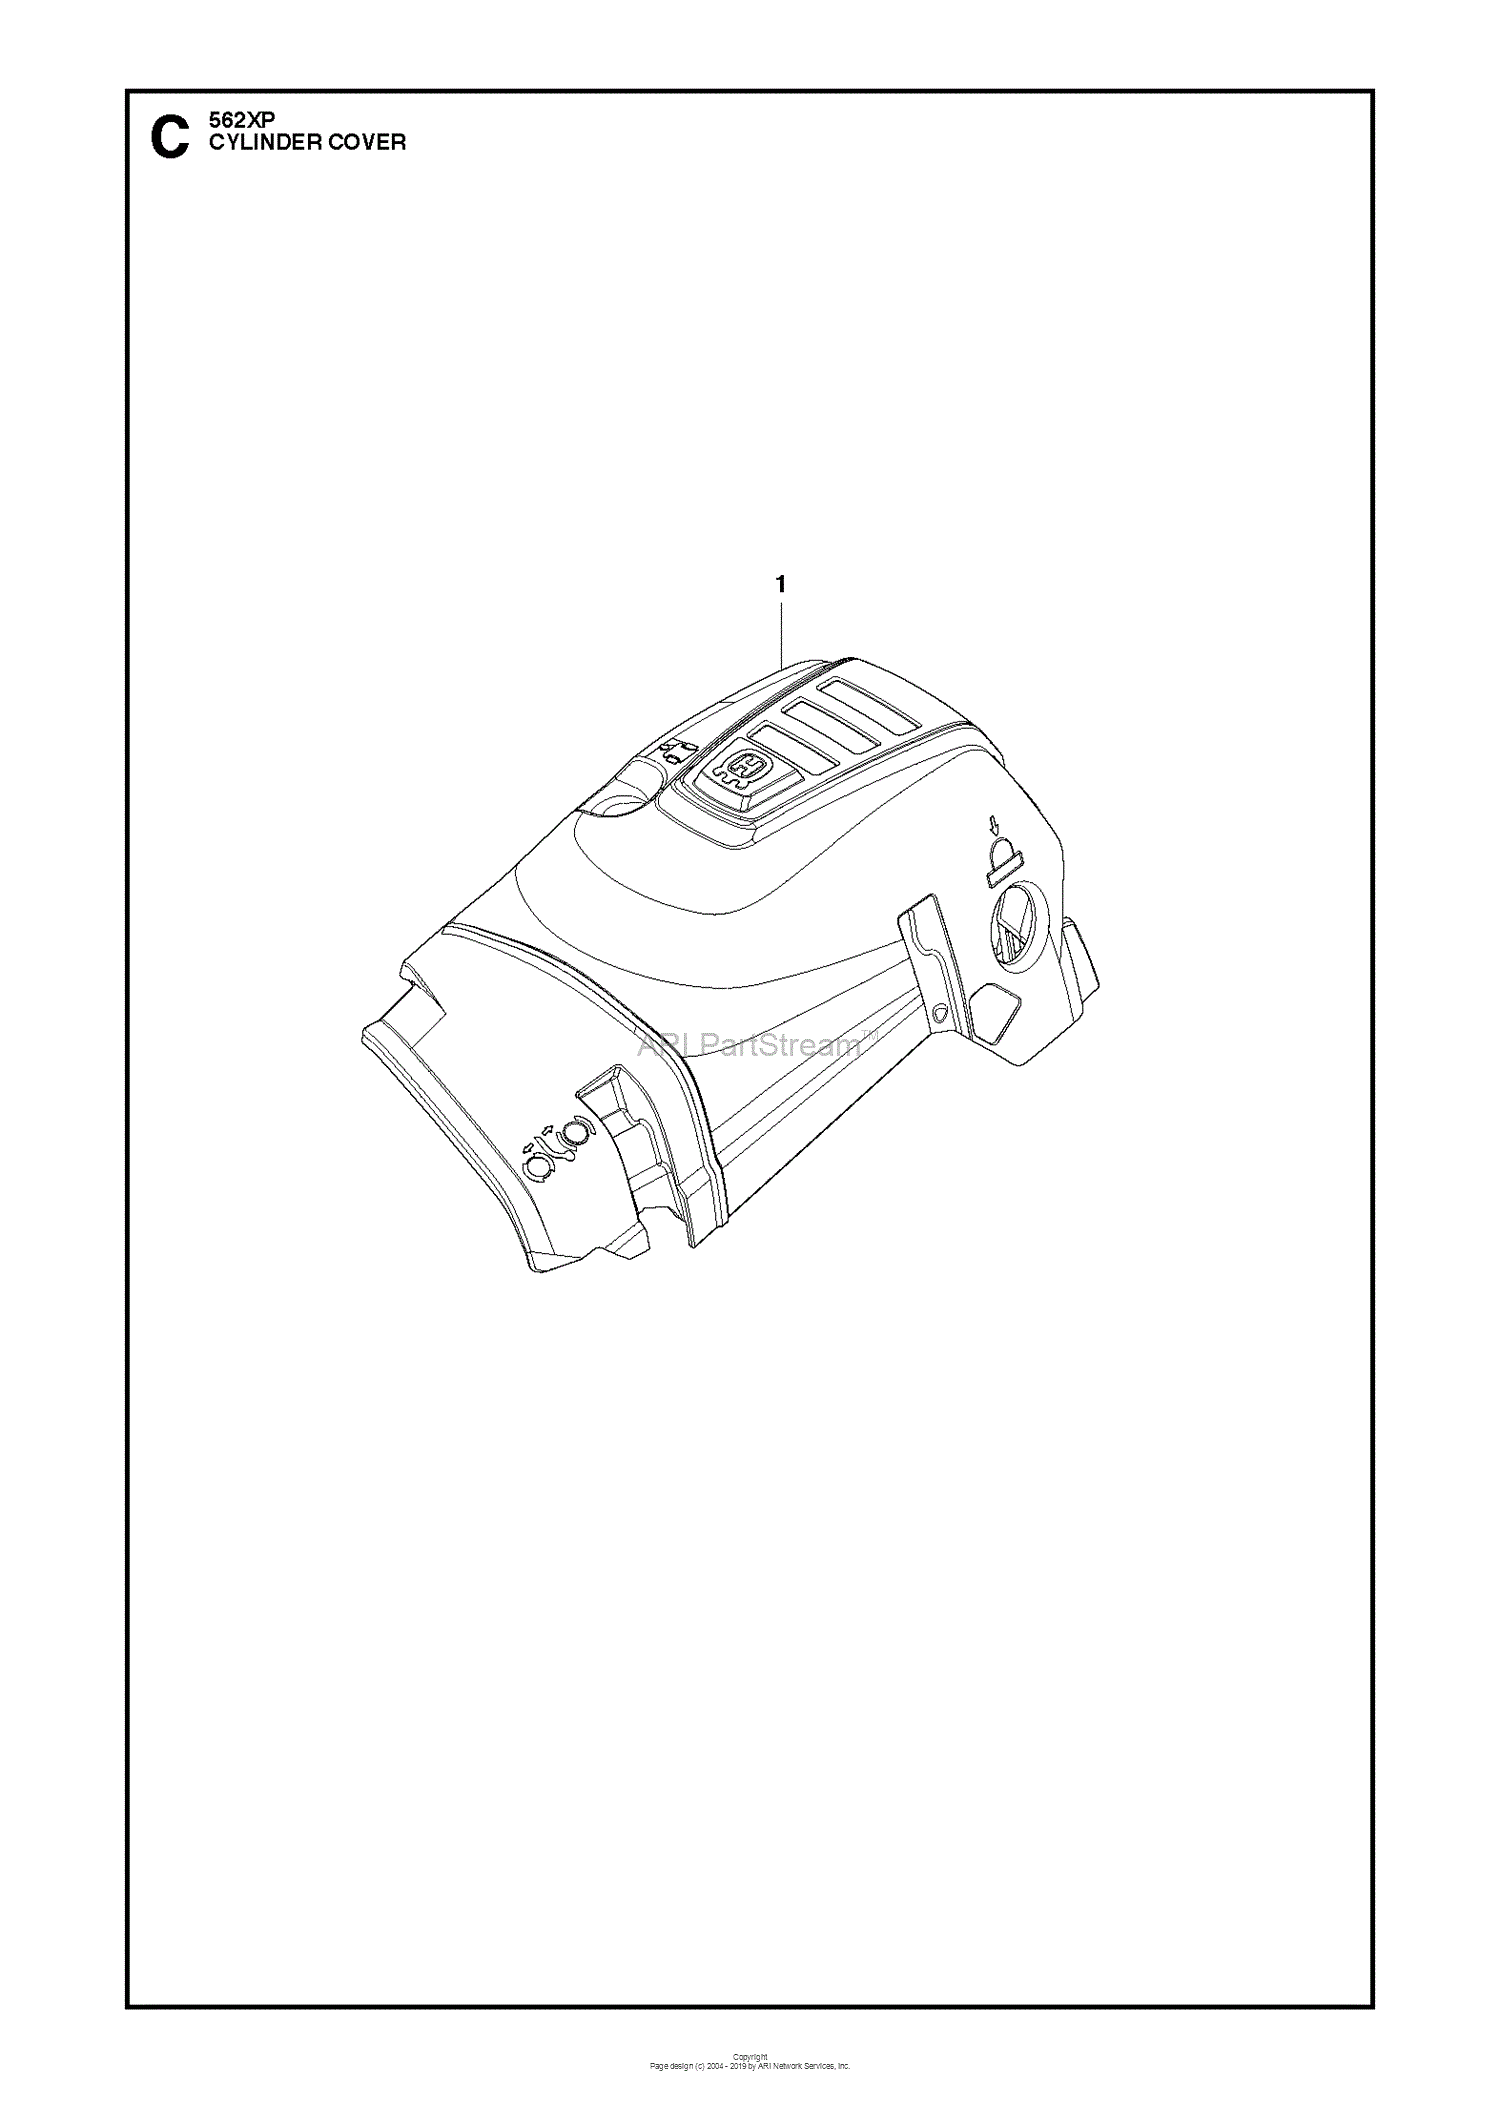 Husqvarna 562xp 11 06 Parts Diagram For Cylinder Cover